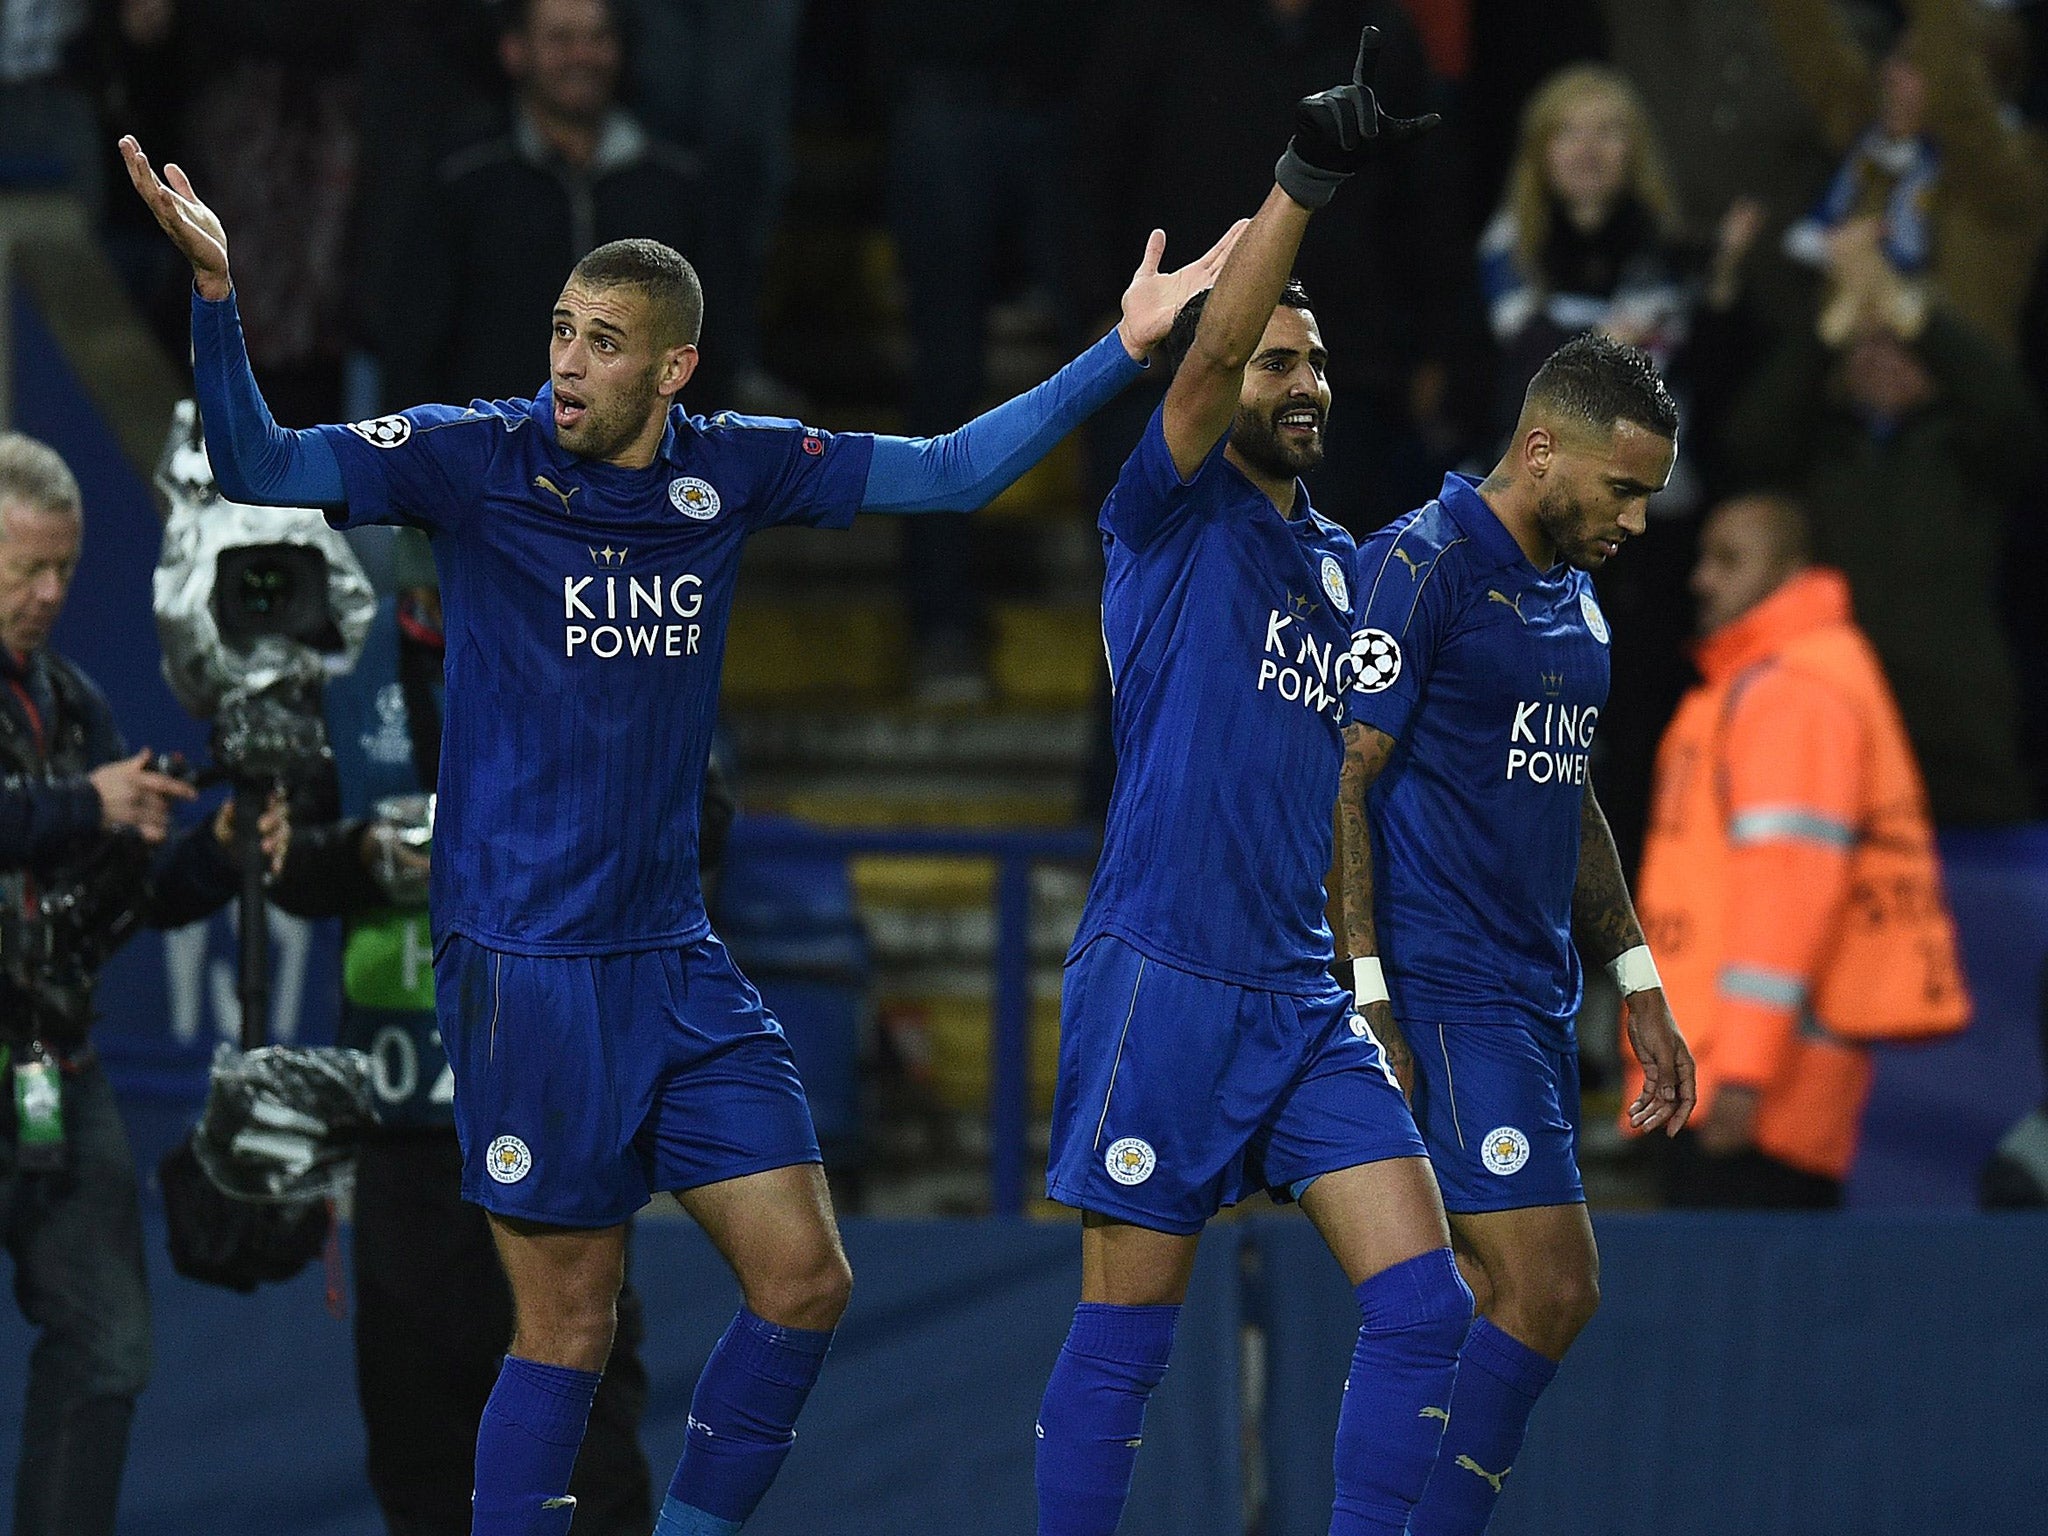 Leicester City are bidding to make it four wins from four in the Champions League against FC Copenhagen